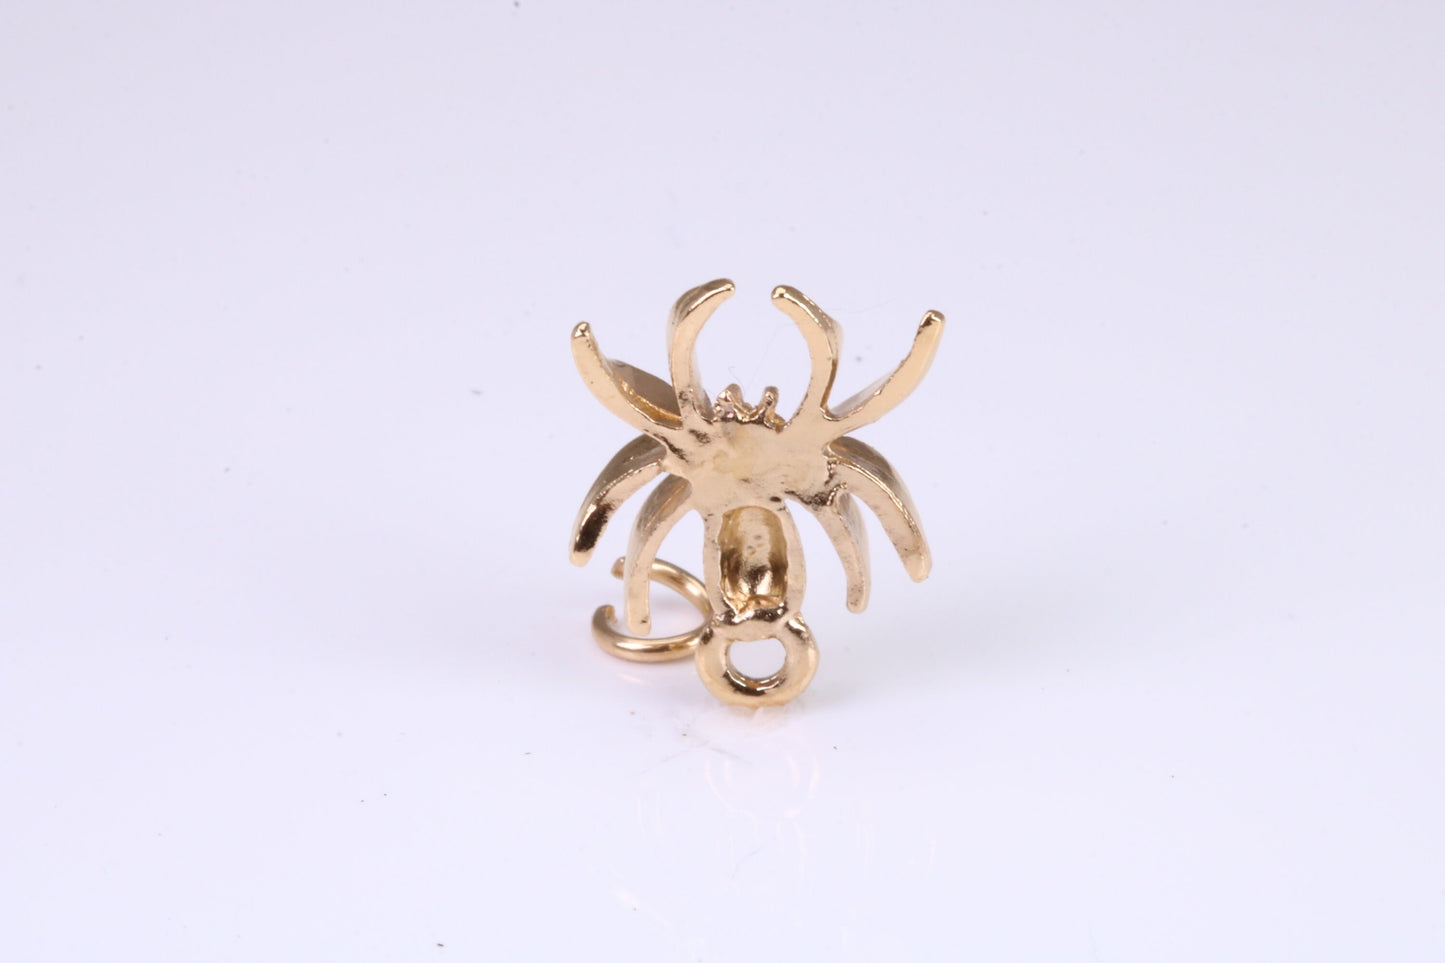 Spider Charm, Traditional Charm, Made from Solid Yellow Gold, British Hallmarked, Complete with Attachment Link